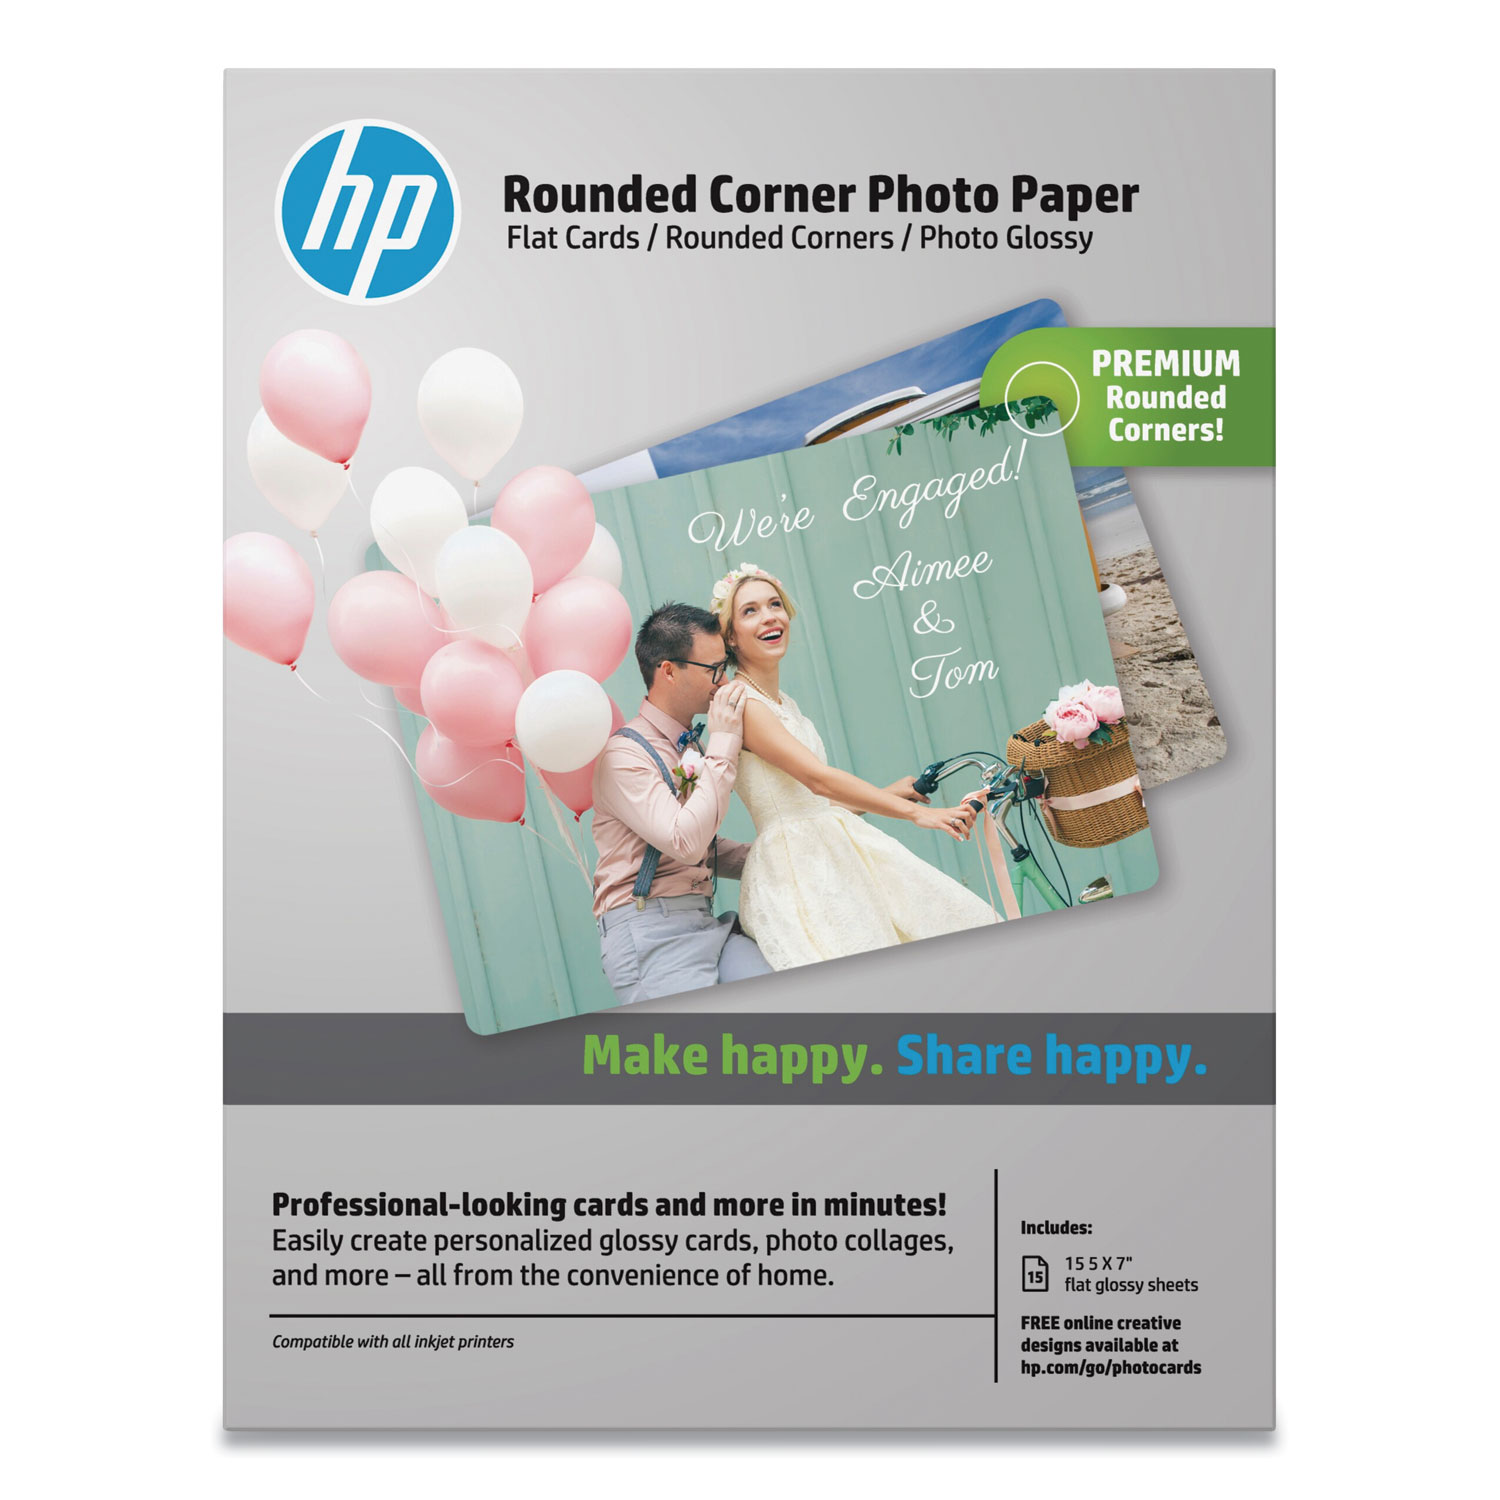  HP 3WL67A Rounded Corner Photo Paper, 10.5 mil, 5 x 7, Glossy White, 15/Pack (HEW3WL67A) 